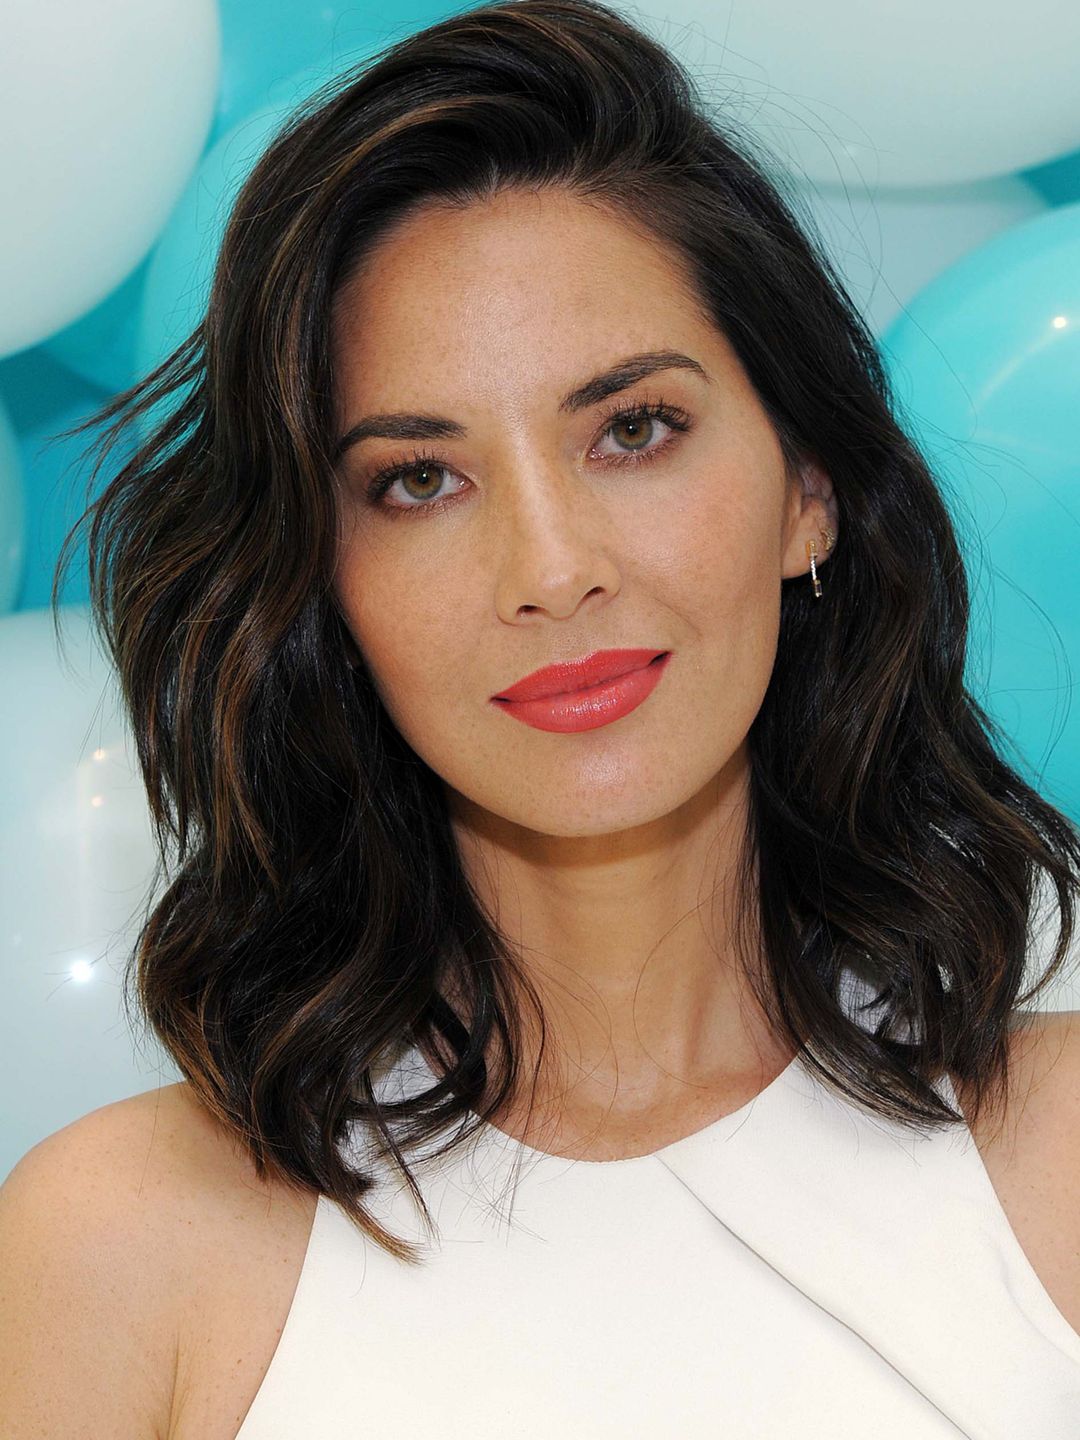 Olivia Munn who are her parents